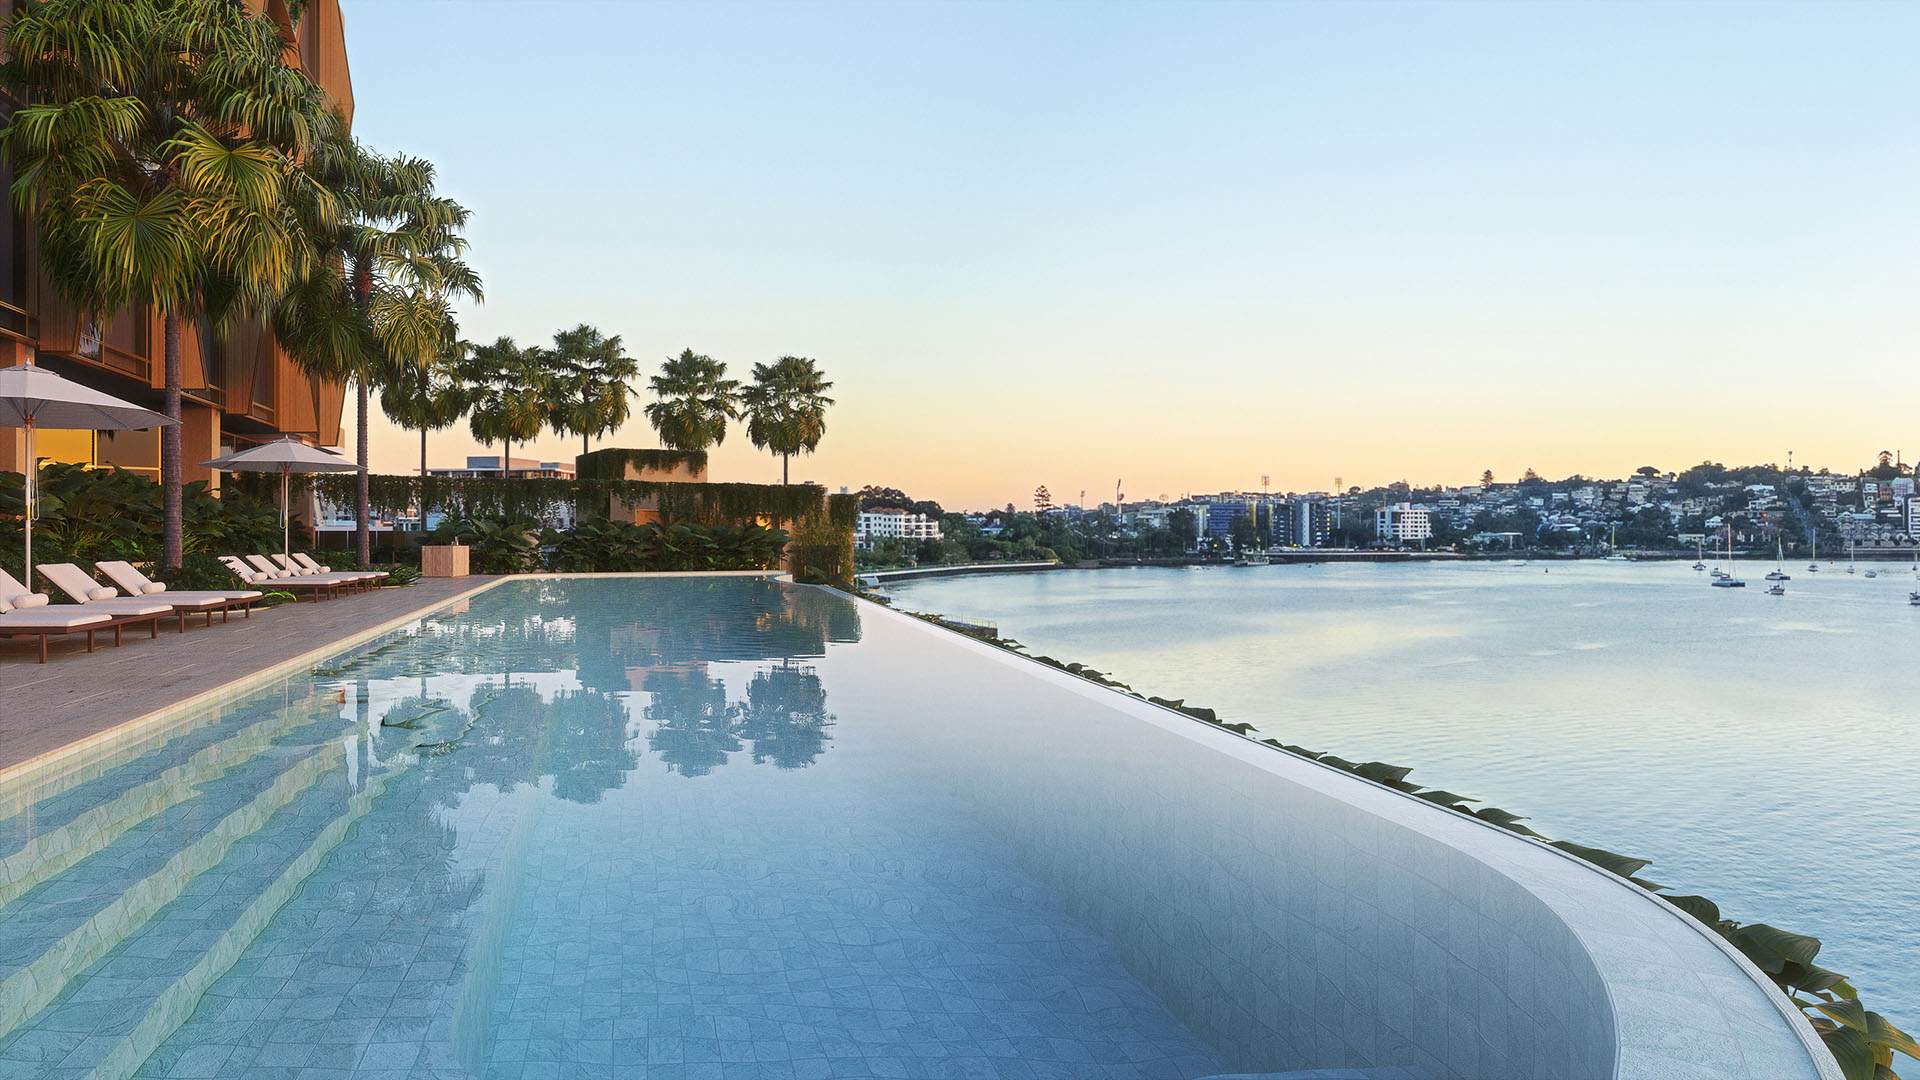 Queensland's First Kimpton Hotel Is Opening in Brisbane with a Stunning Infinity Pool Overlooking the River